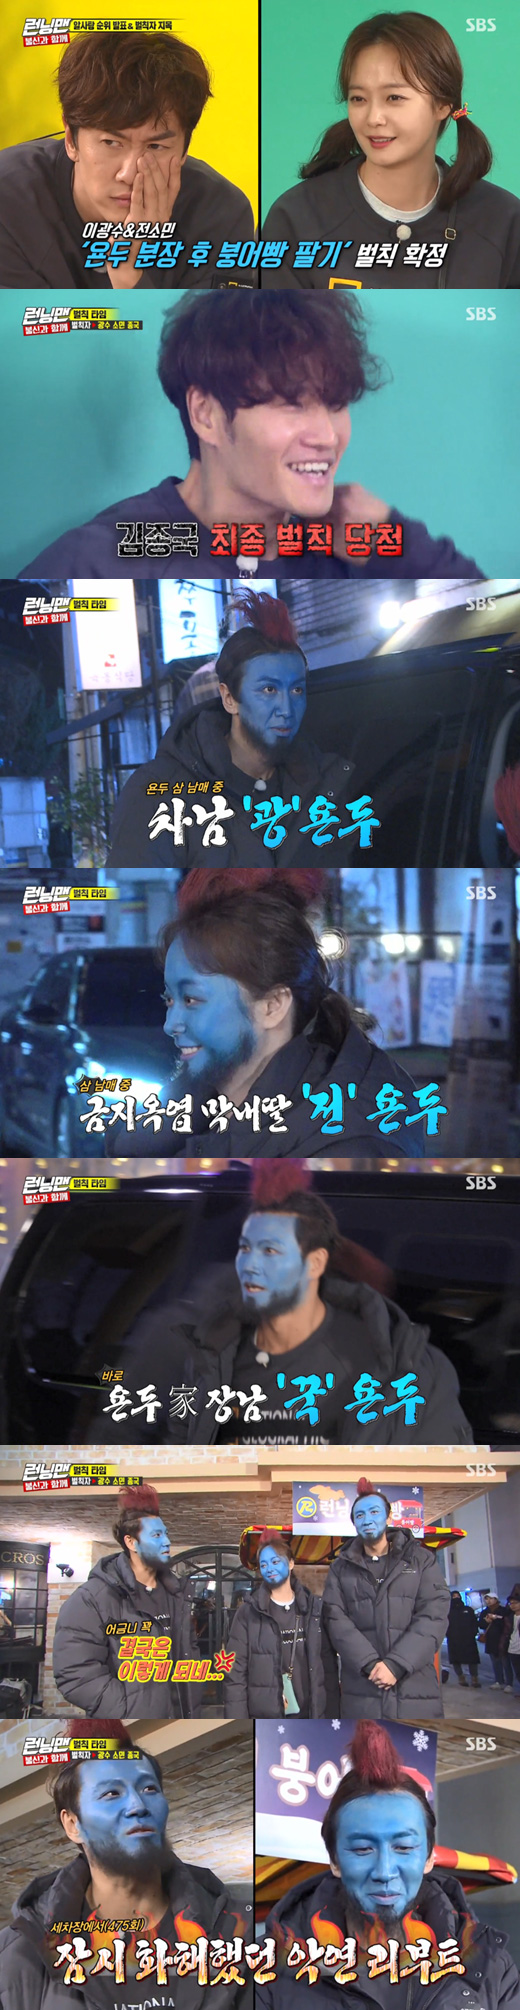 Actors Jeon So-min and Lee Kwang-soo, and singer Kim Jong-kook performed penalties for the character Yondu make up of the movie Guardians of the Galaxy as penalties.In the SBS entertainment program Running Man broadcasted on the 1st, members performed a group mission and raced with disbelief, which received penalties in the order of low candy in case of failure.On the day of the broadcast, Jeon So-min was seventh, and Lee Kwang-soo was last in the game.And together, the two got the chance to choose who would carry out the penalty.As a result of the award, Lee Kwang-soo and Jeon So-min chose Kim Jong-kook, and the three people handed out 100 breads to the citizens with Yondu make up.At the end of the broadcast, Kim Jong-kook said, Todays work was so unsettling.Originally, it was not such a lucky style, but it ended up like this. 